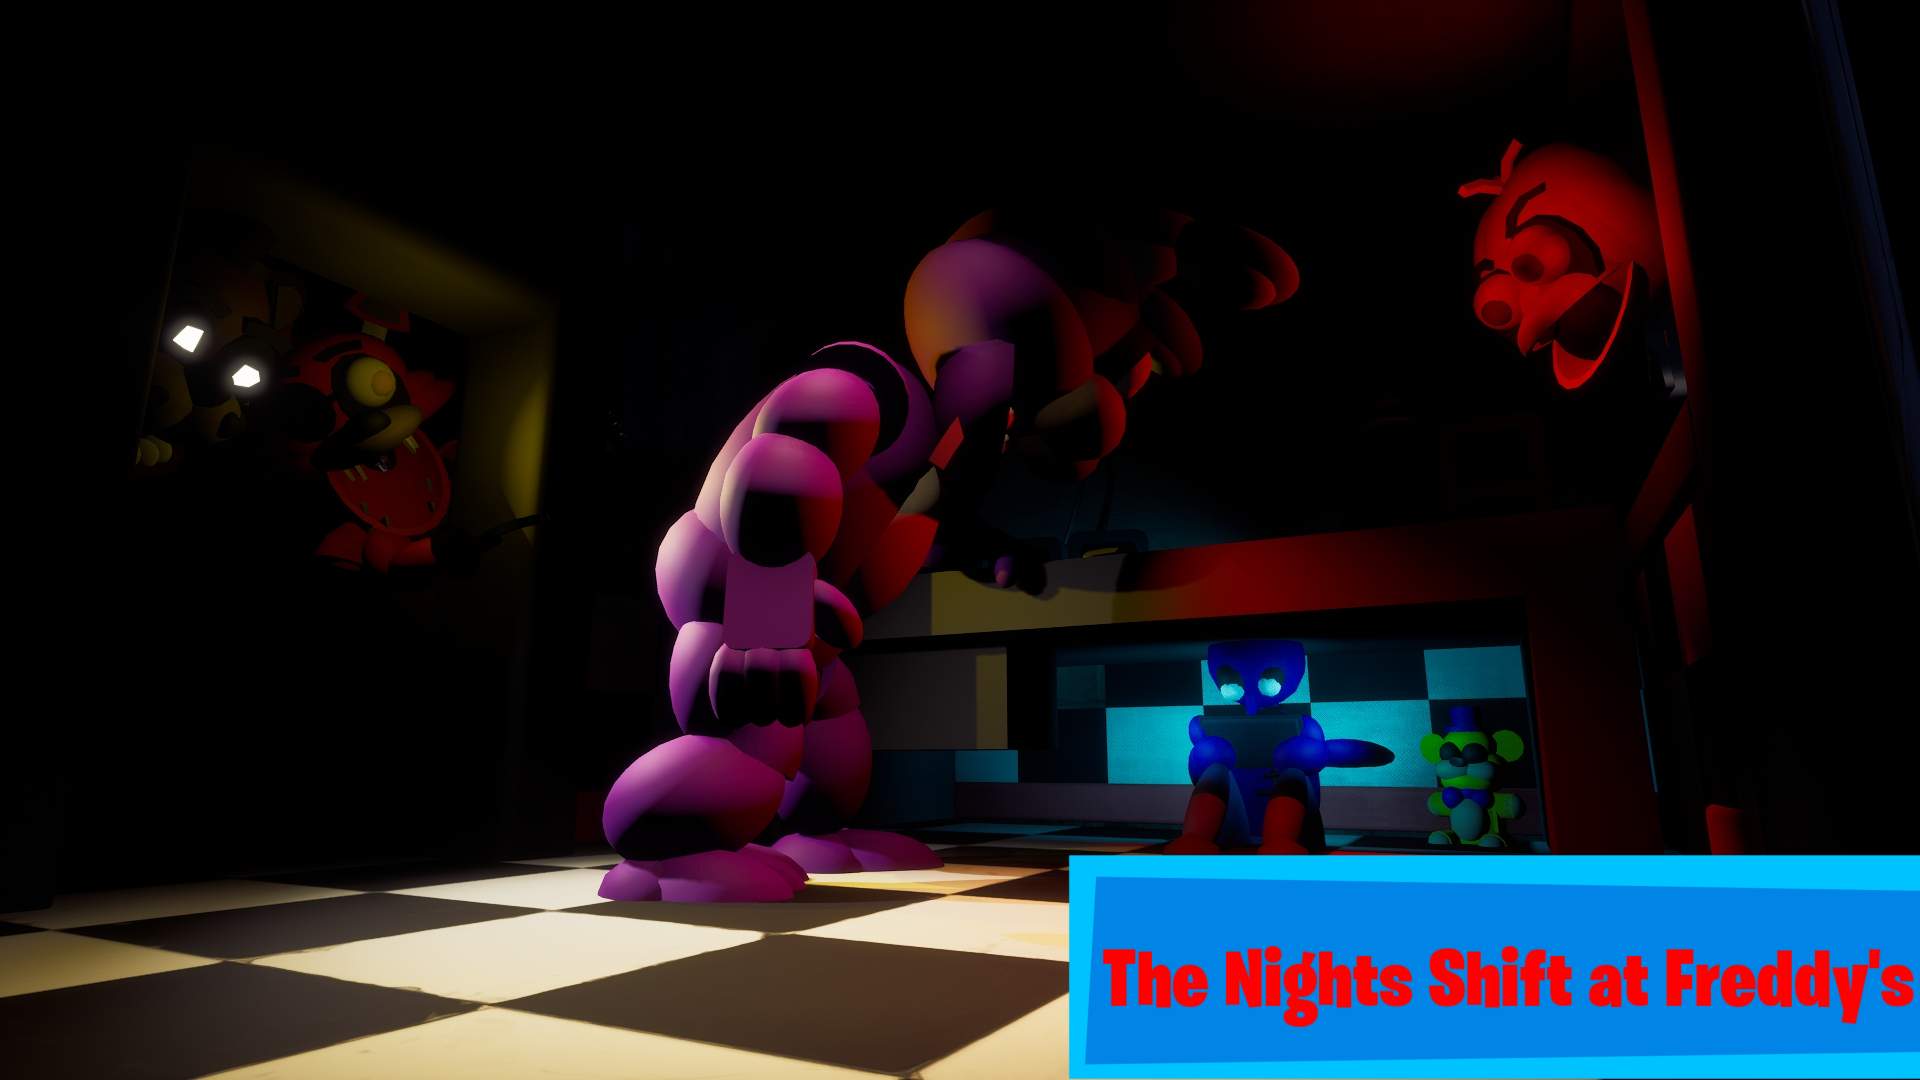 THE NIGHT SHIFT AT FREDDY'S